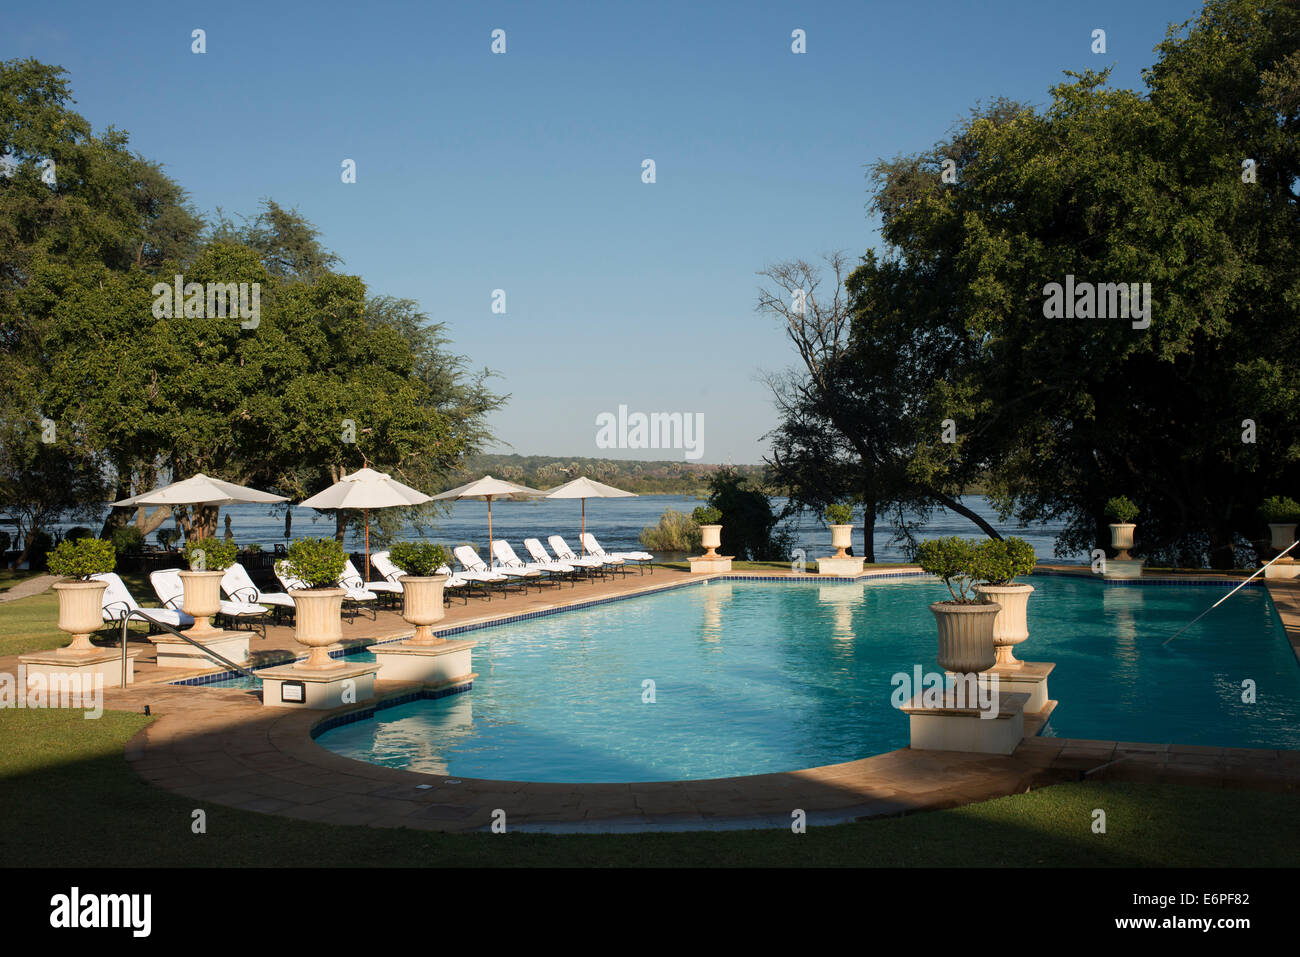 Royal Livingstone Hotel swimming pool. At The Royal Livingstone Hotel, you can expect nothing less than the best service. The ai Stock Photo